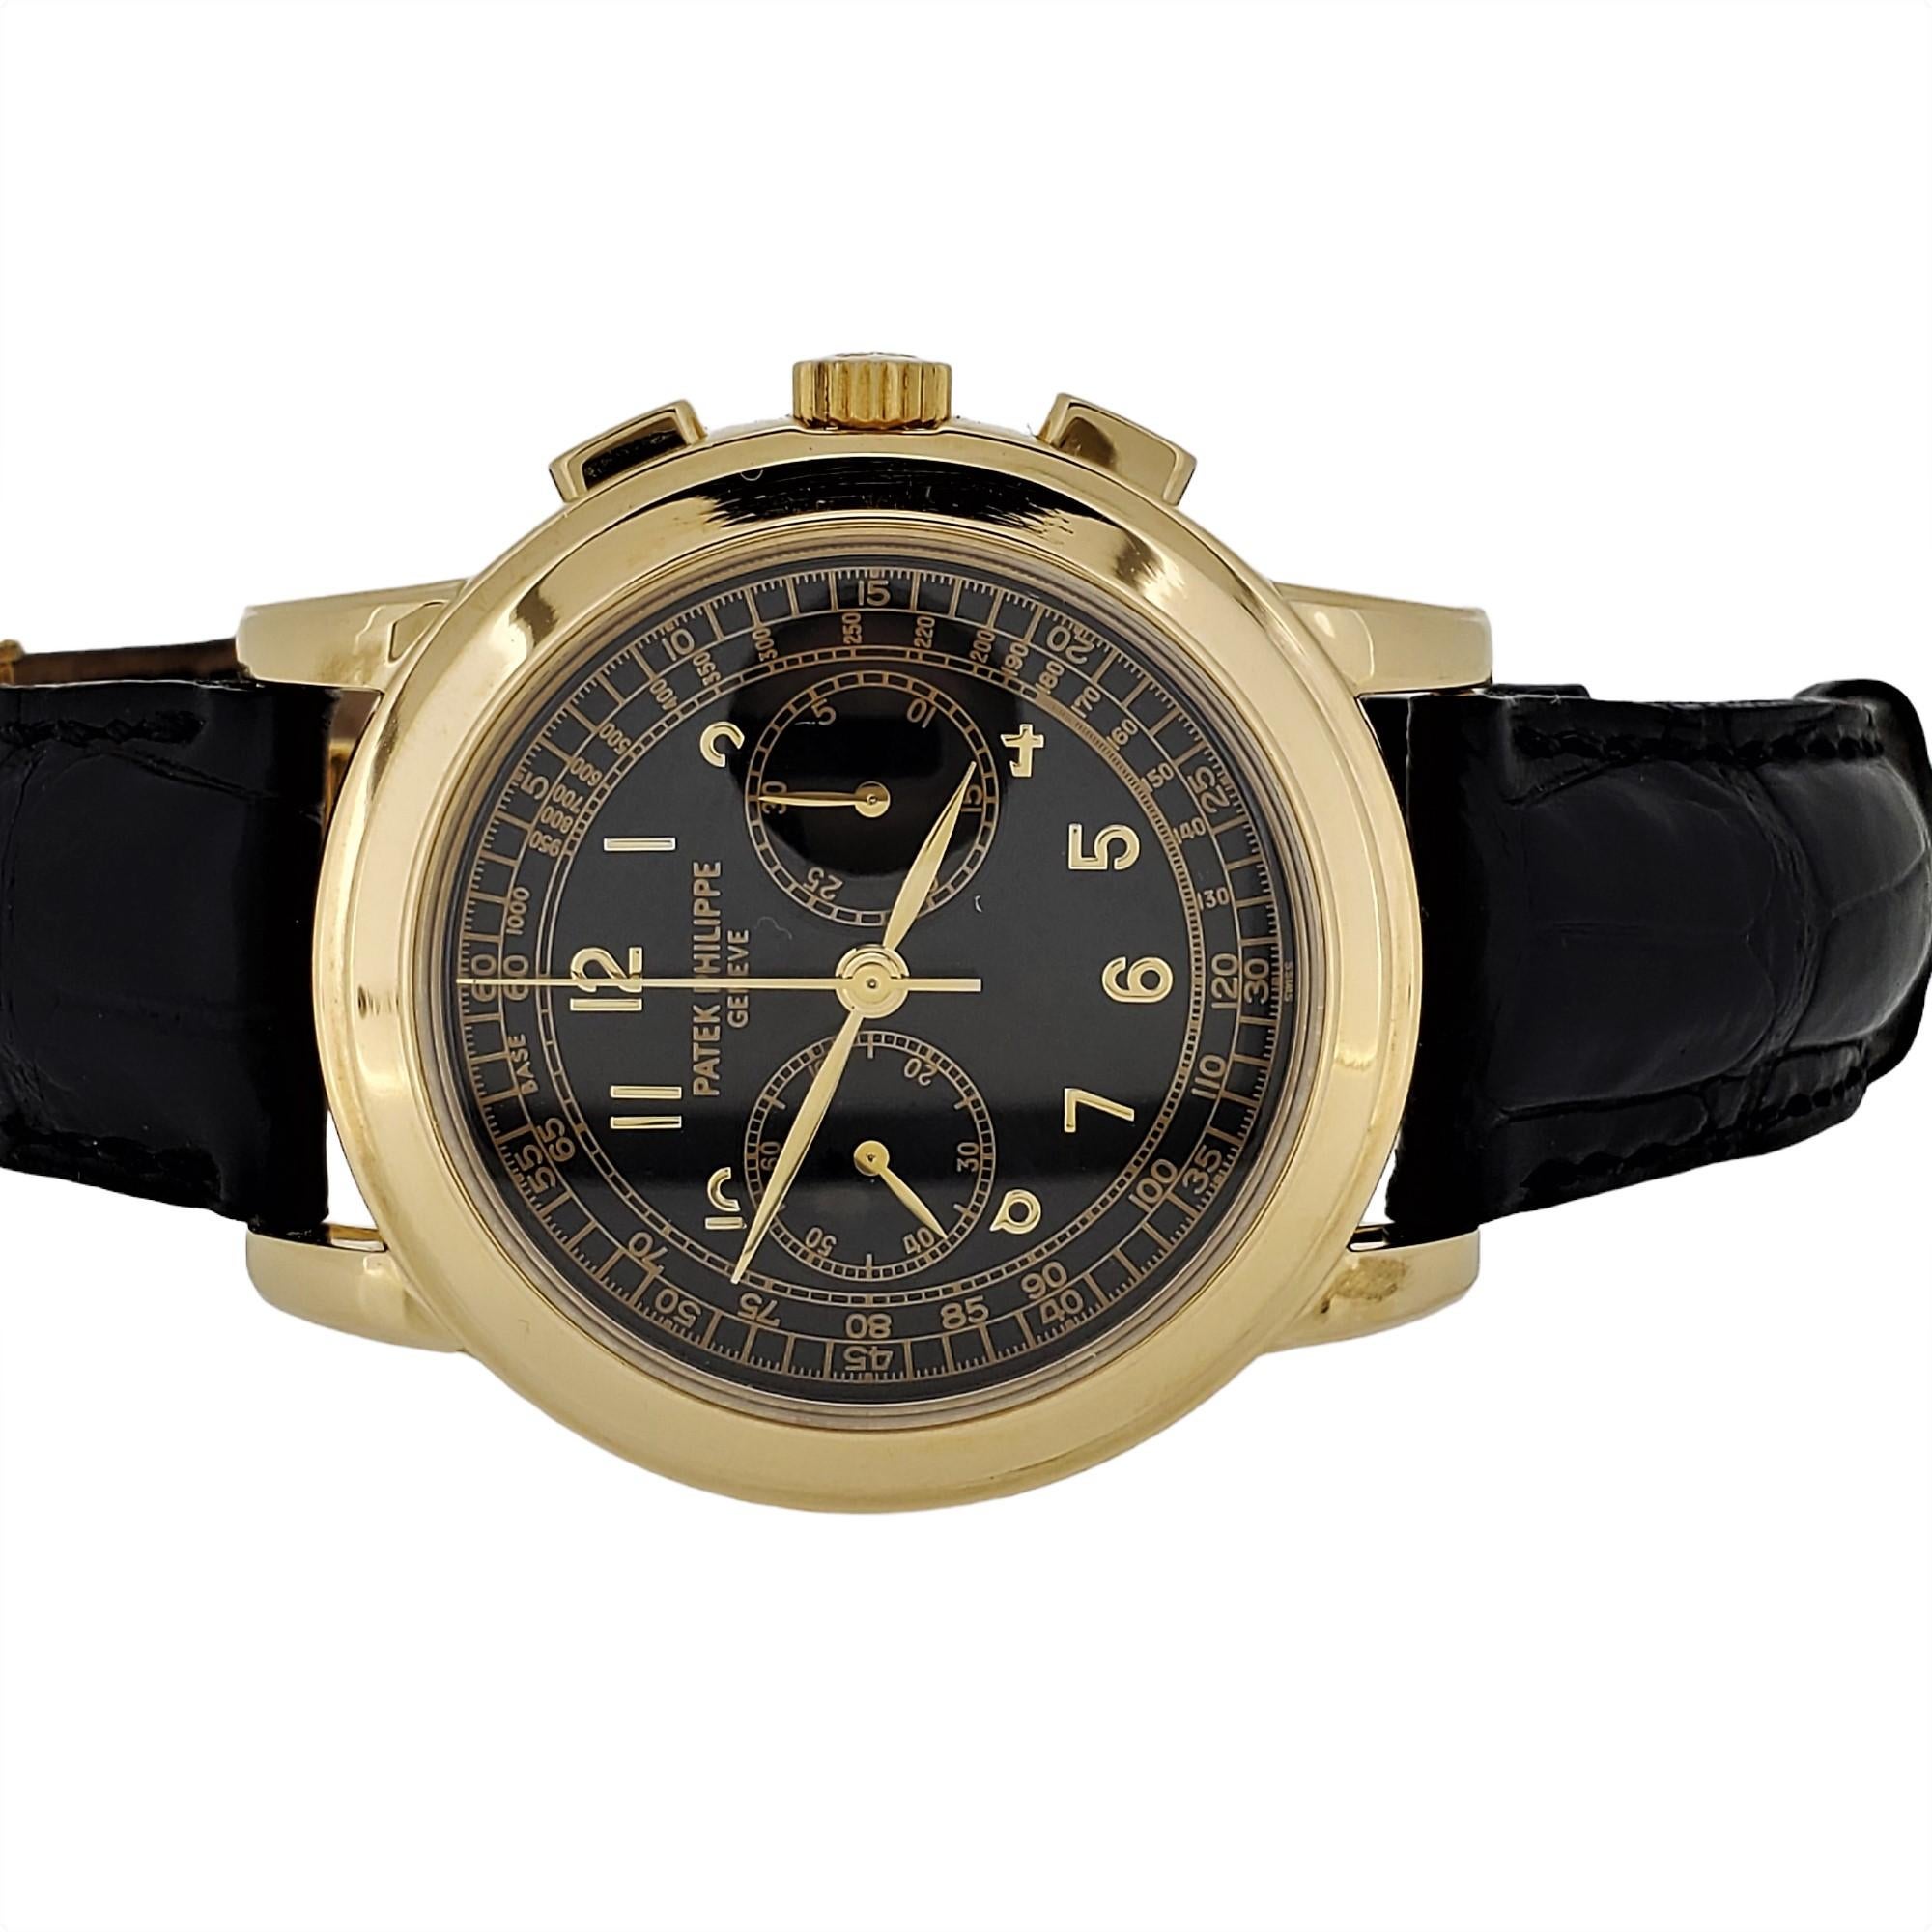 Patek Philippe 5070J Chronograph Watch Yellow gold 42 mm Case Circa 2000 For Sale 3